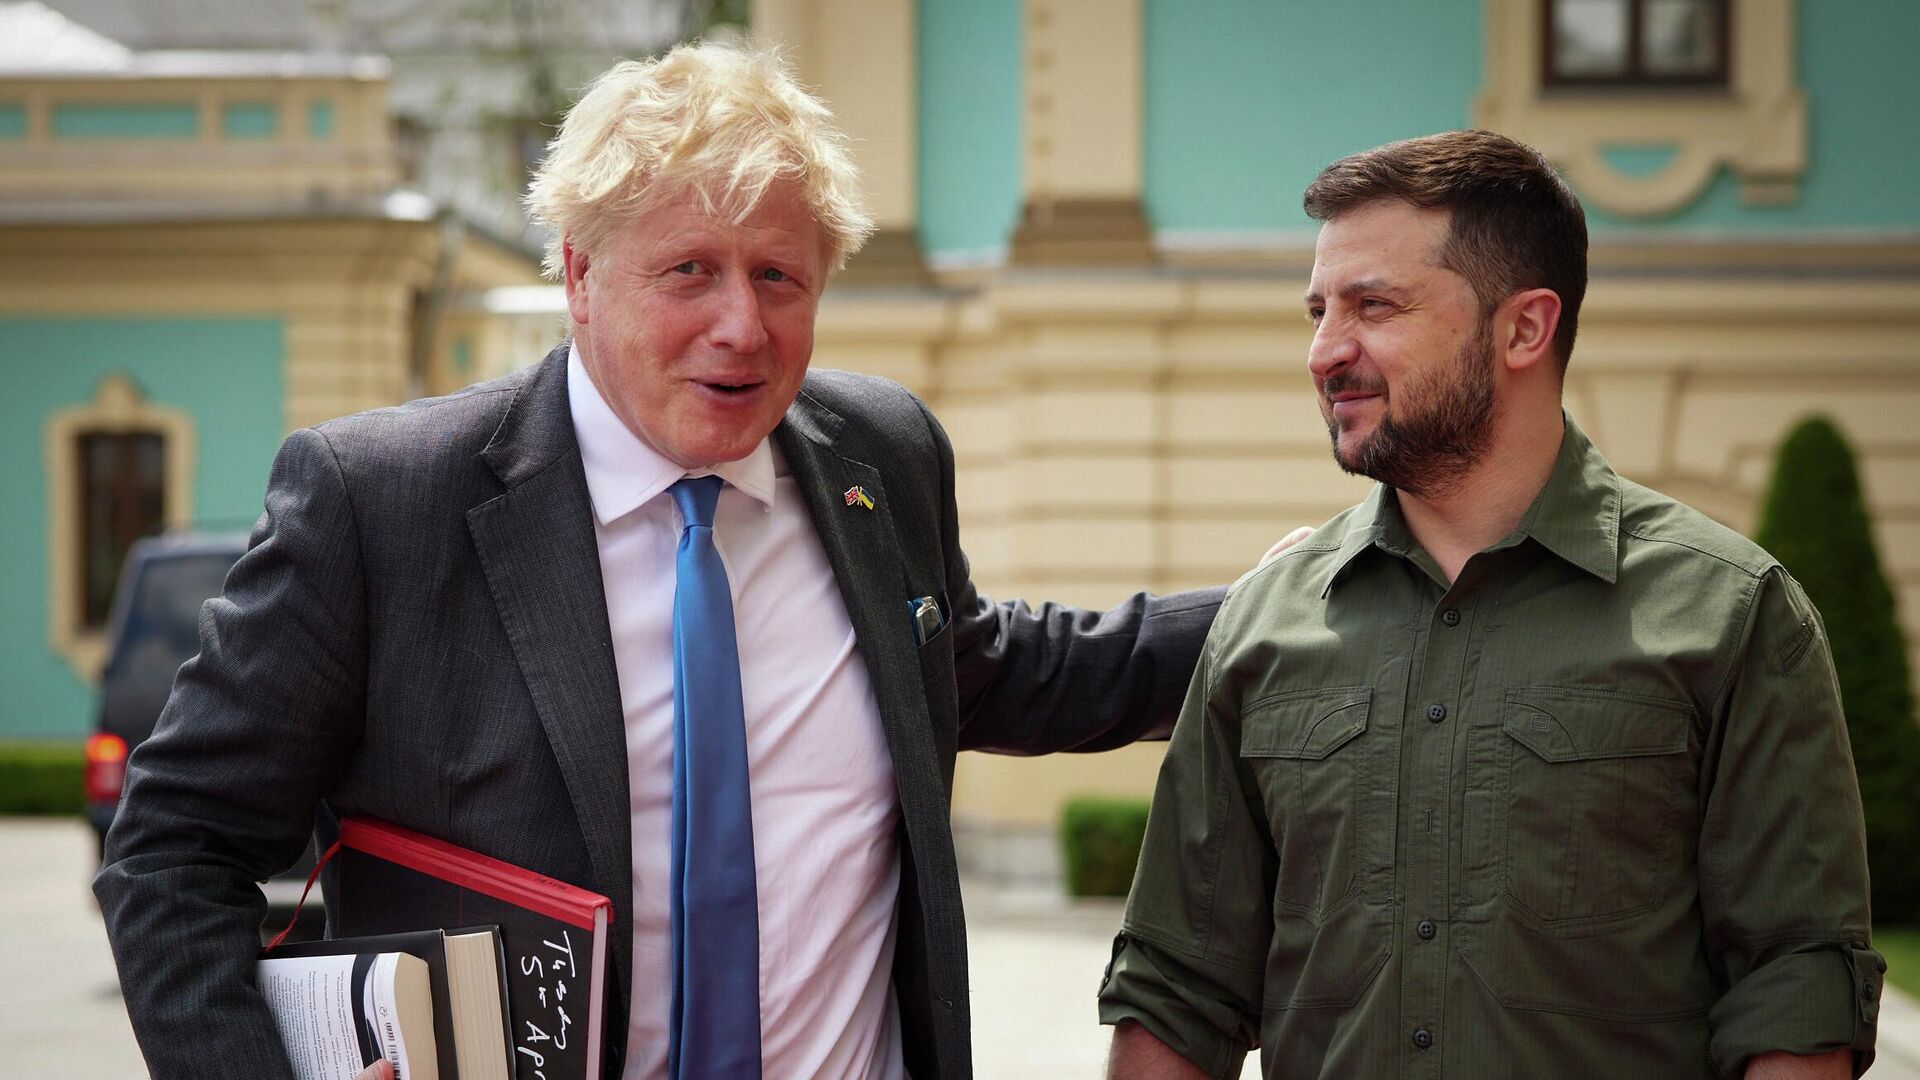 In this image provided by the Ukrainian Presidential Press Office, Ukrainian President Volodymyr Zelenskyy, right, and Britain's Prime Minister Boris Johnson, ahead of their meeting in Kyiv, Ukraine, Friday, June 17, 2022. (Ukrainian Presidential Press Office via AP) - Sputnik International, 1920, 20.06.2022